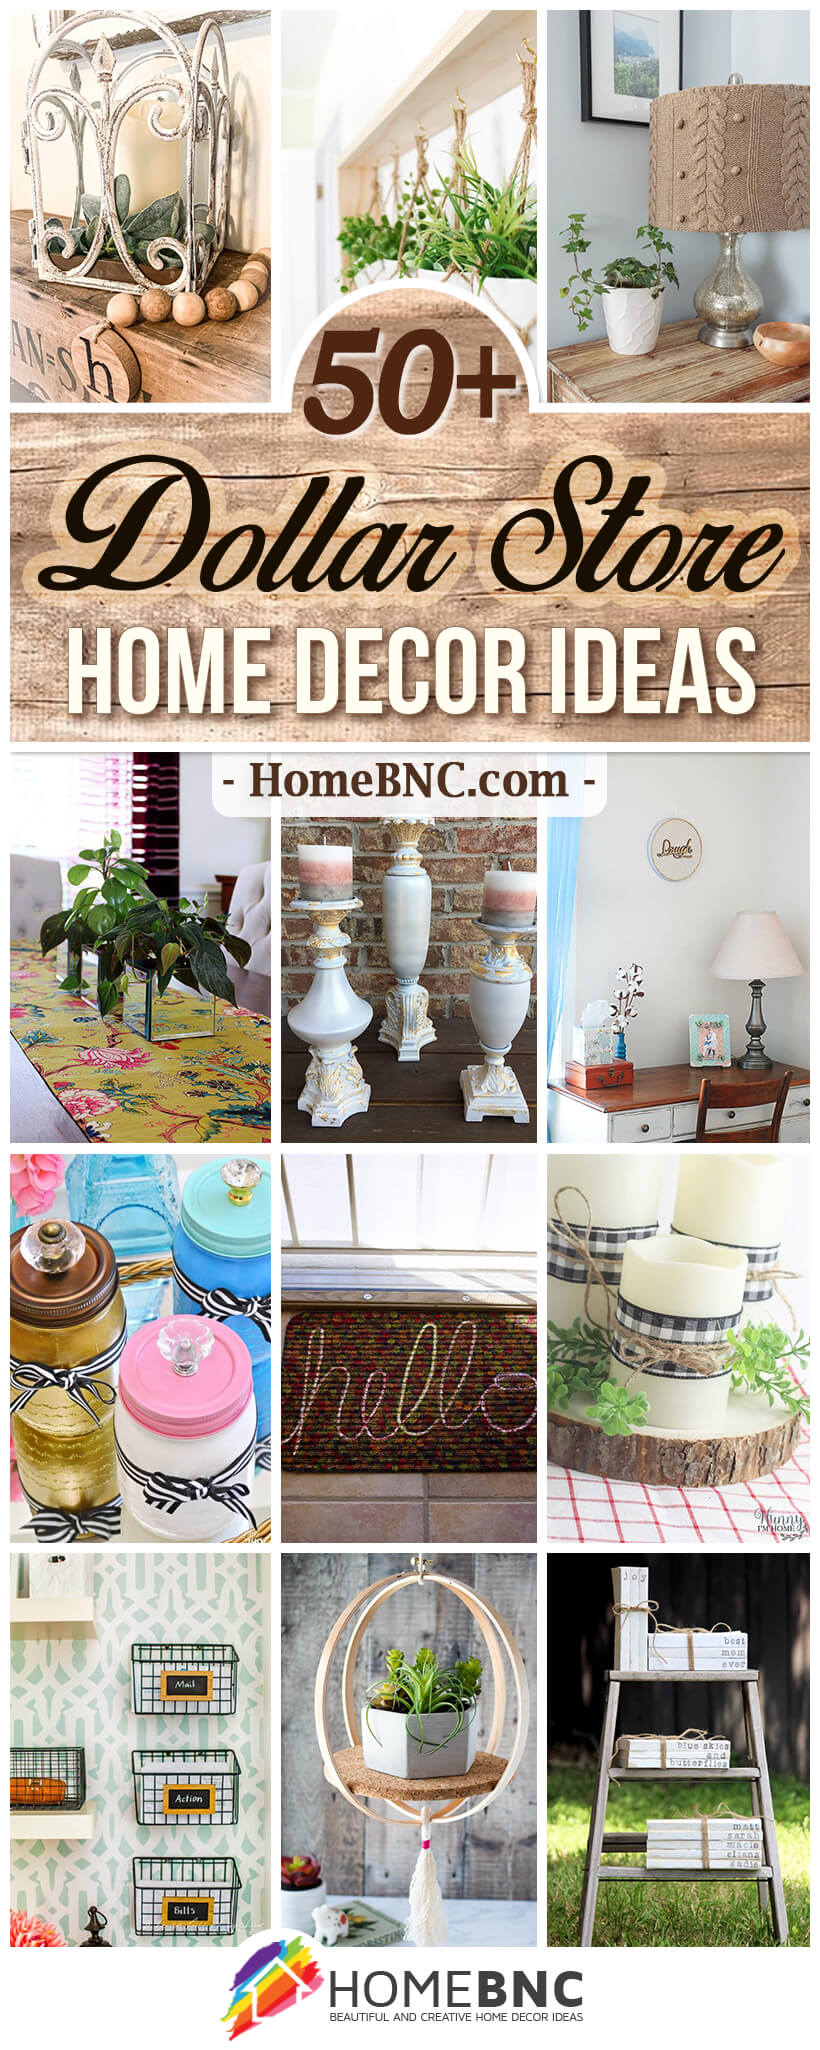 20+ Best DIY Dollar Store Home Decor Ideas and Designs for 20